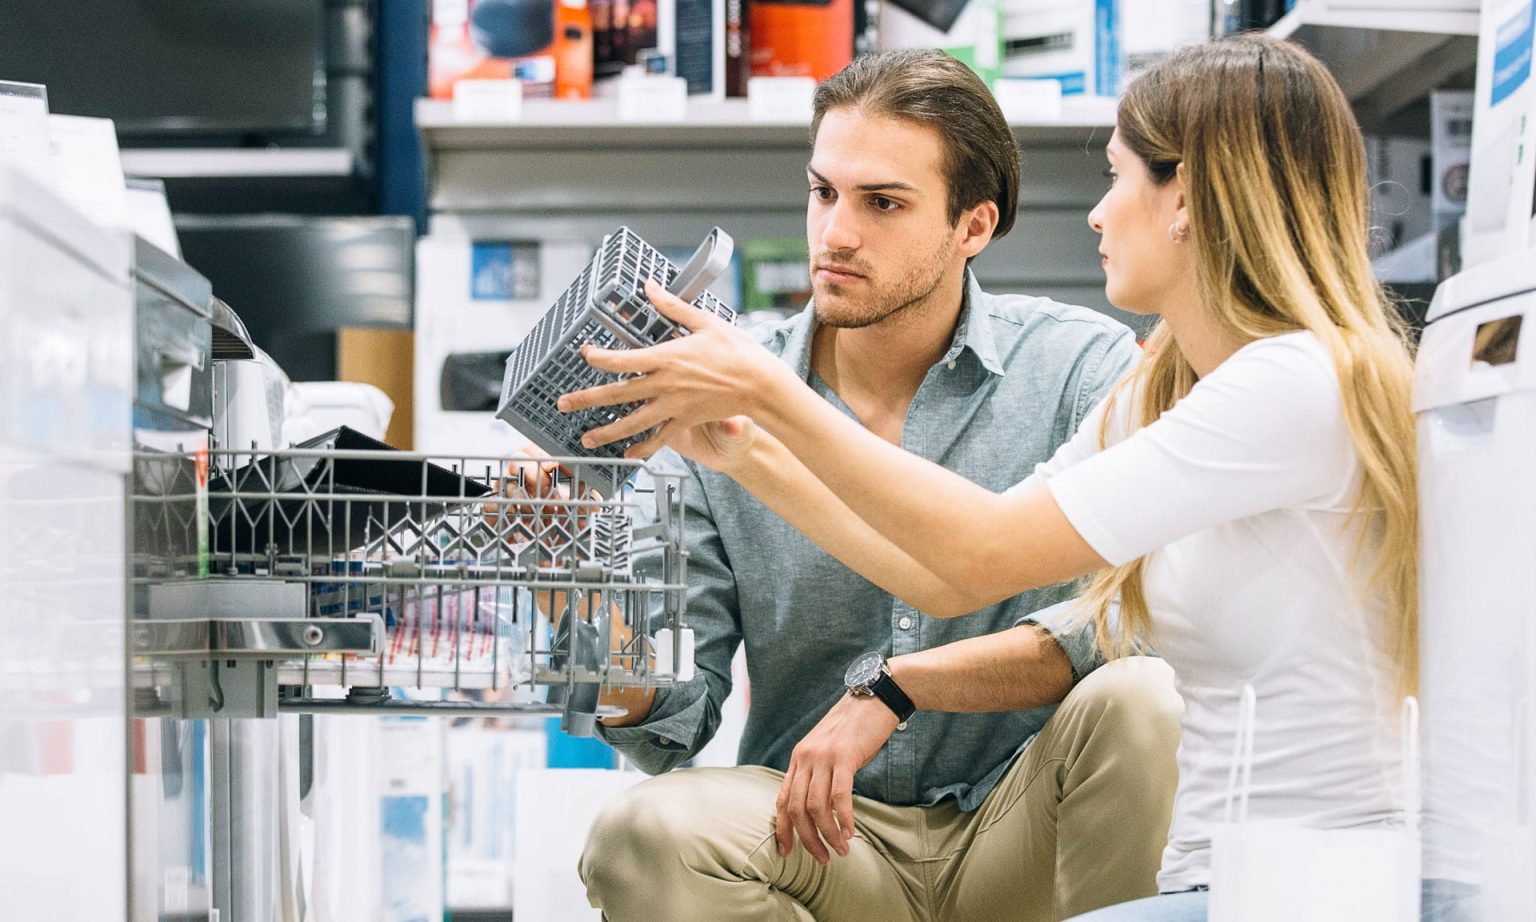 Dishwasher vs. Hand Wash: Which One is Good?